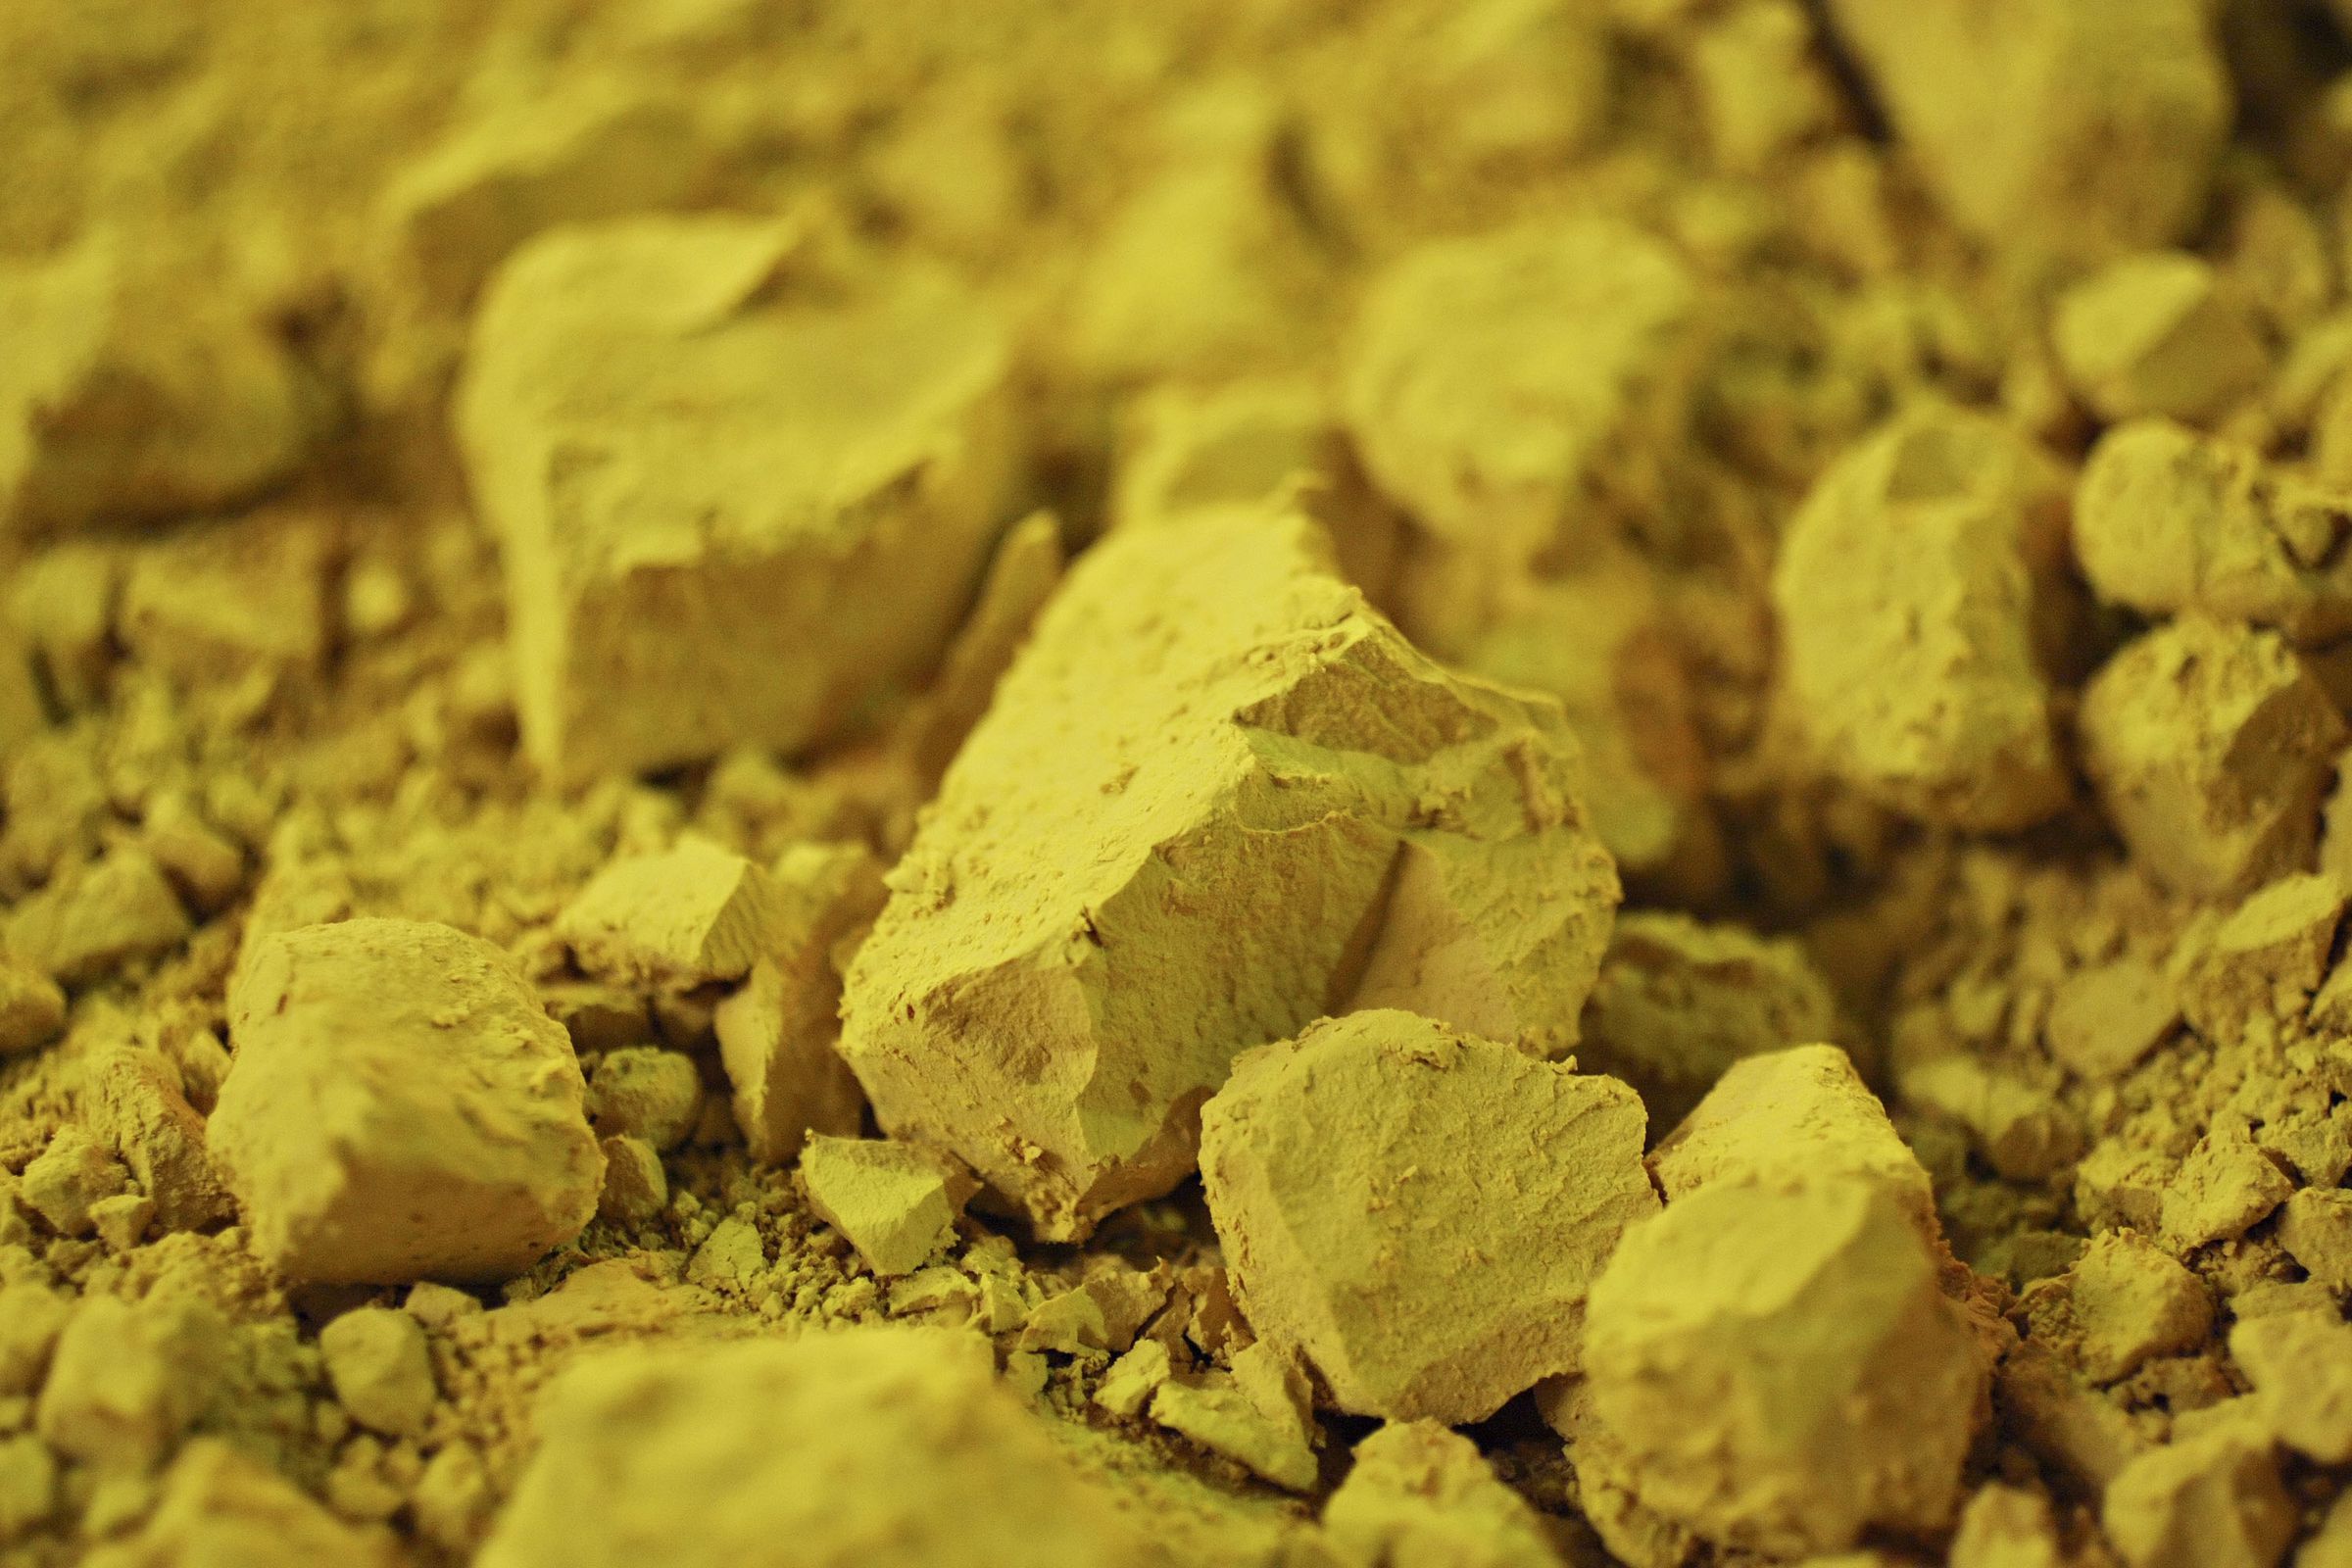 Uranium concentrate, commonly known as U3O8 or yellowcake, s